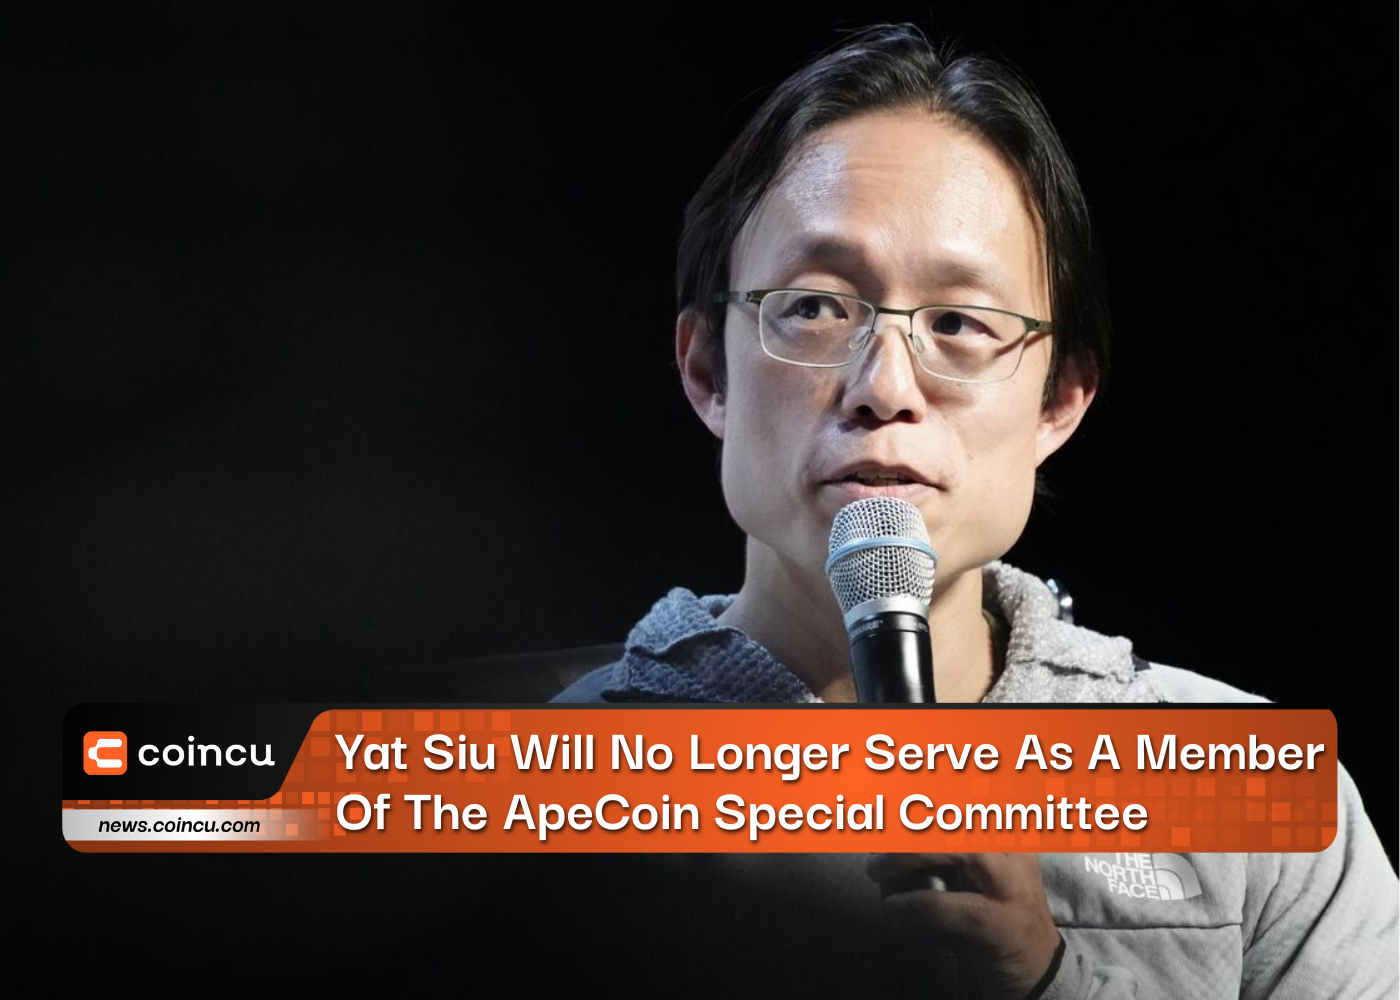 Yat Siu Will No Longer Serve As A Member Of The ApeCoin Special Committee